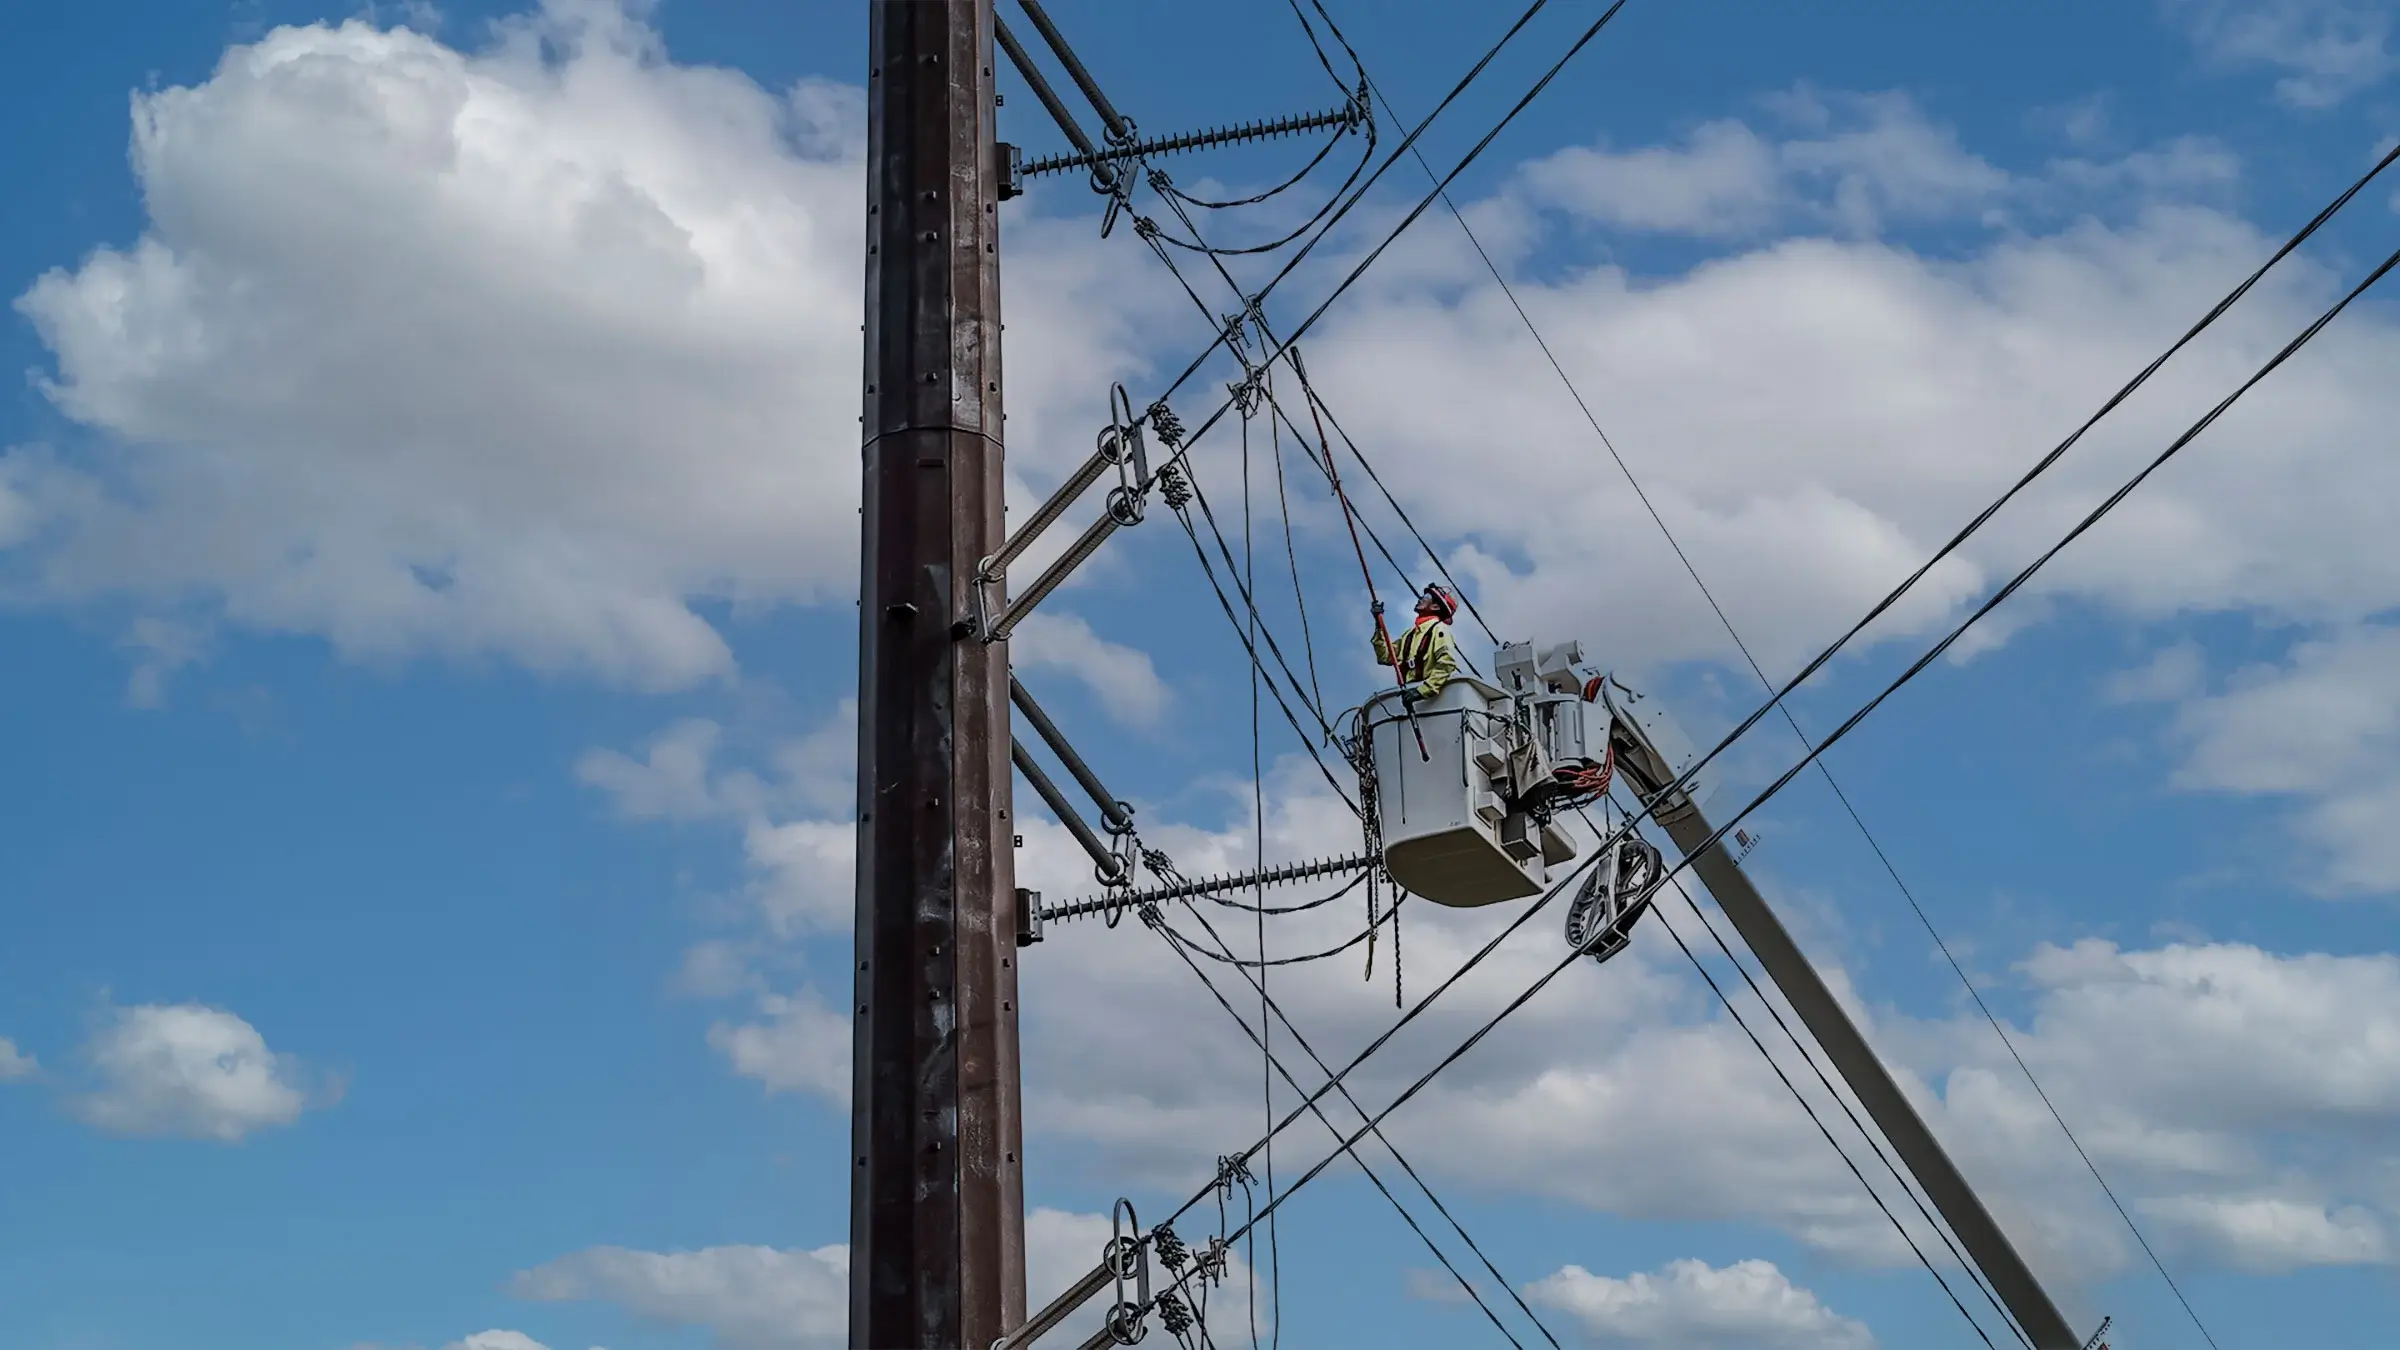 A Michels Power crew member operates on a power line from a bucket